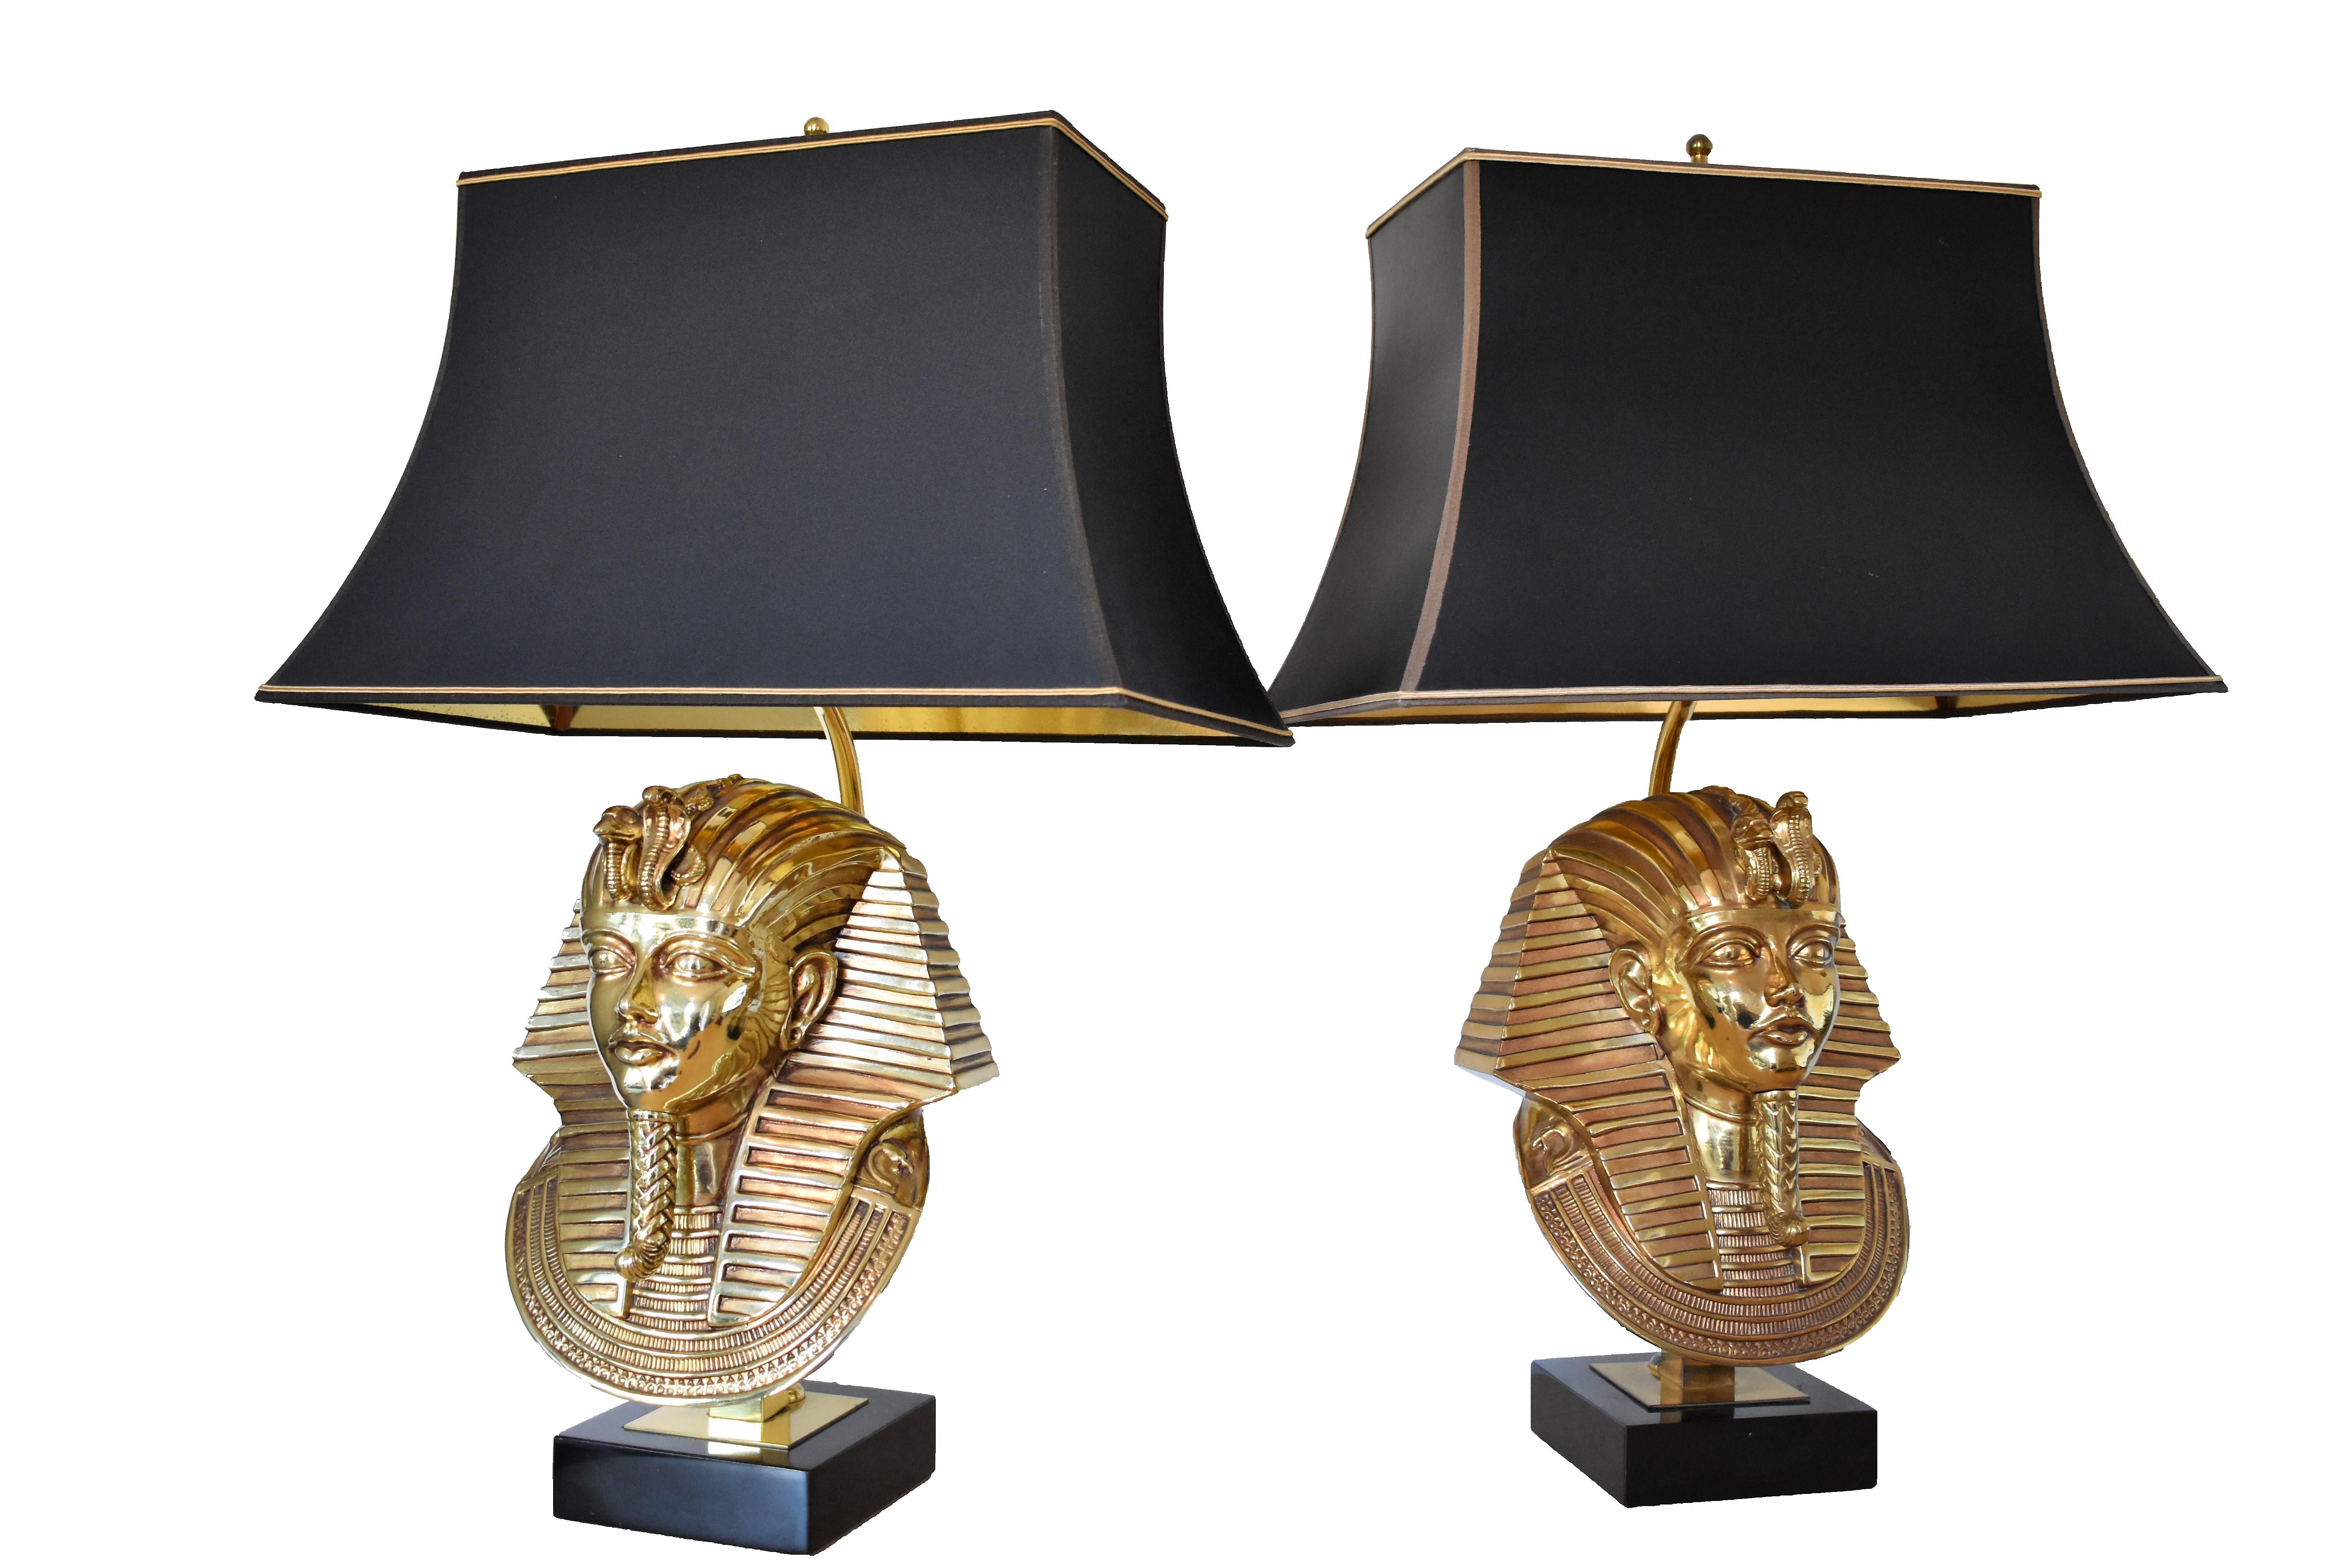 These impressive and luxurious pharaoh head table lamps are made from brass and plated with 24-karat gold. They are mounted on a black marble base and have original dark grey and gold lampshades.

Each table lamp has room for three bulbs (two large